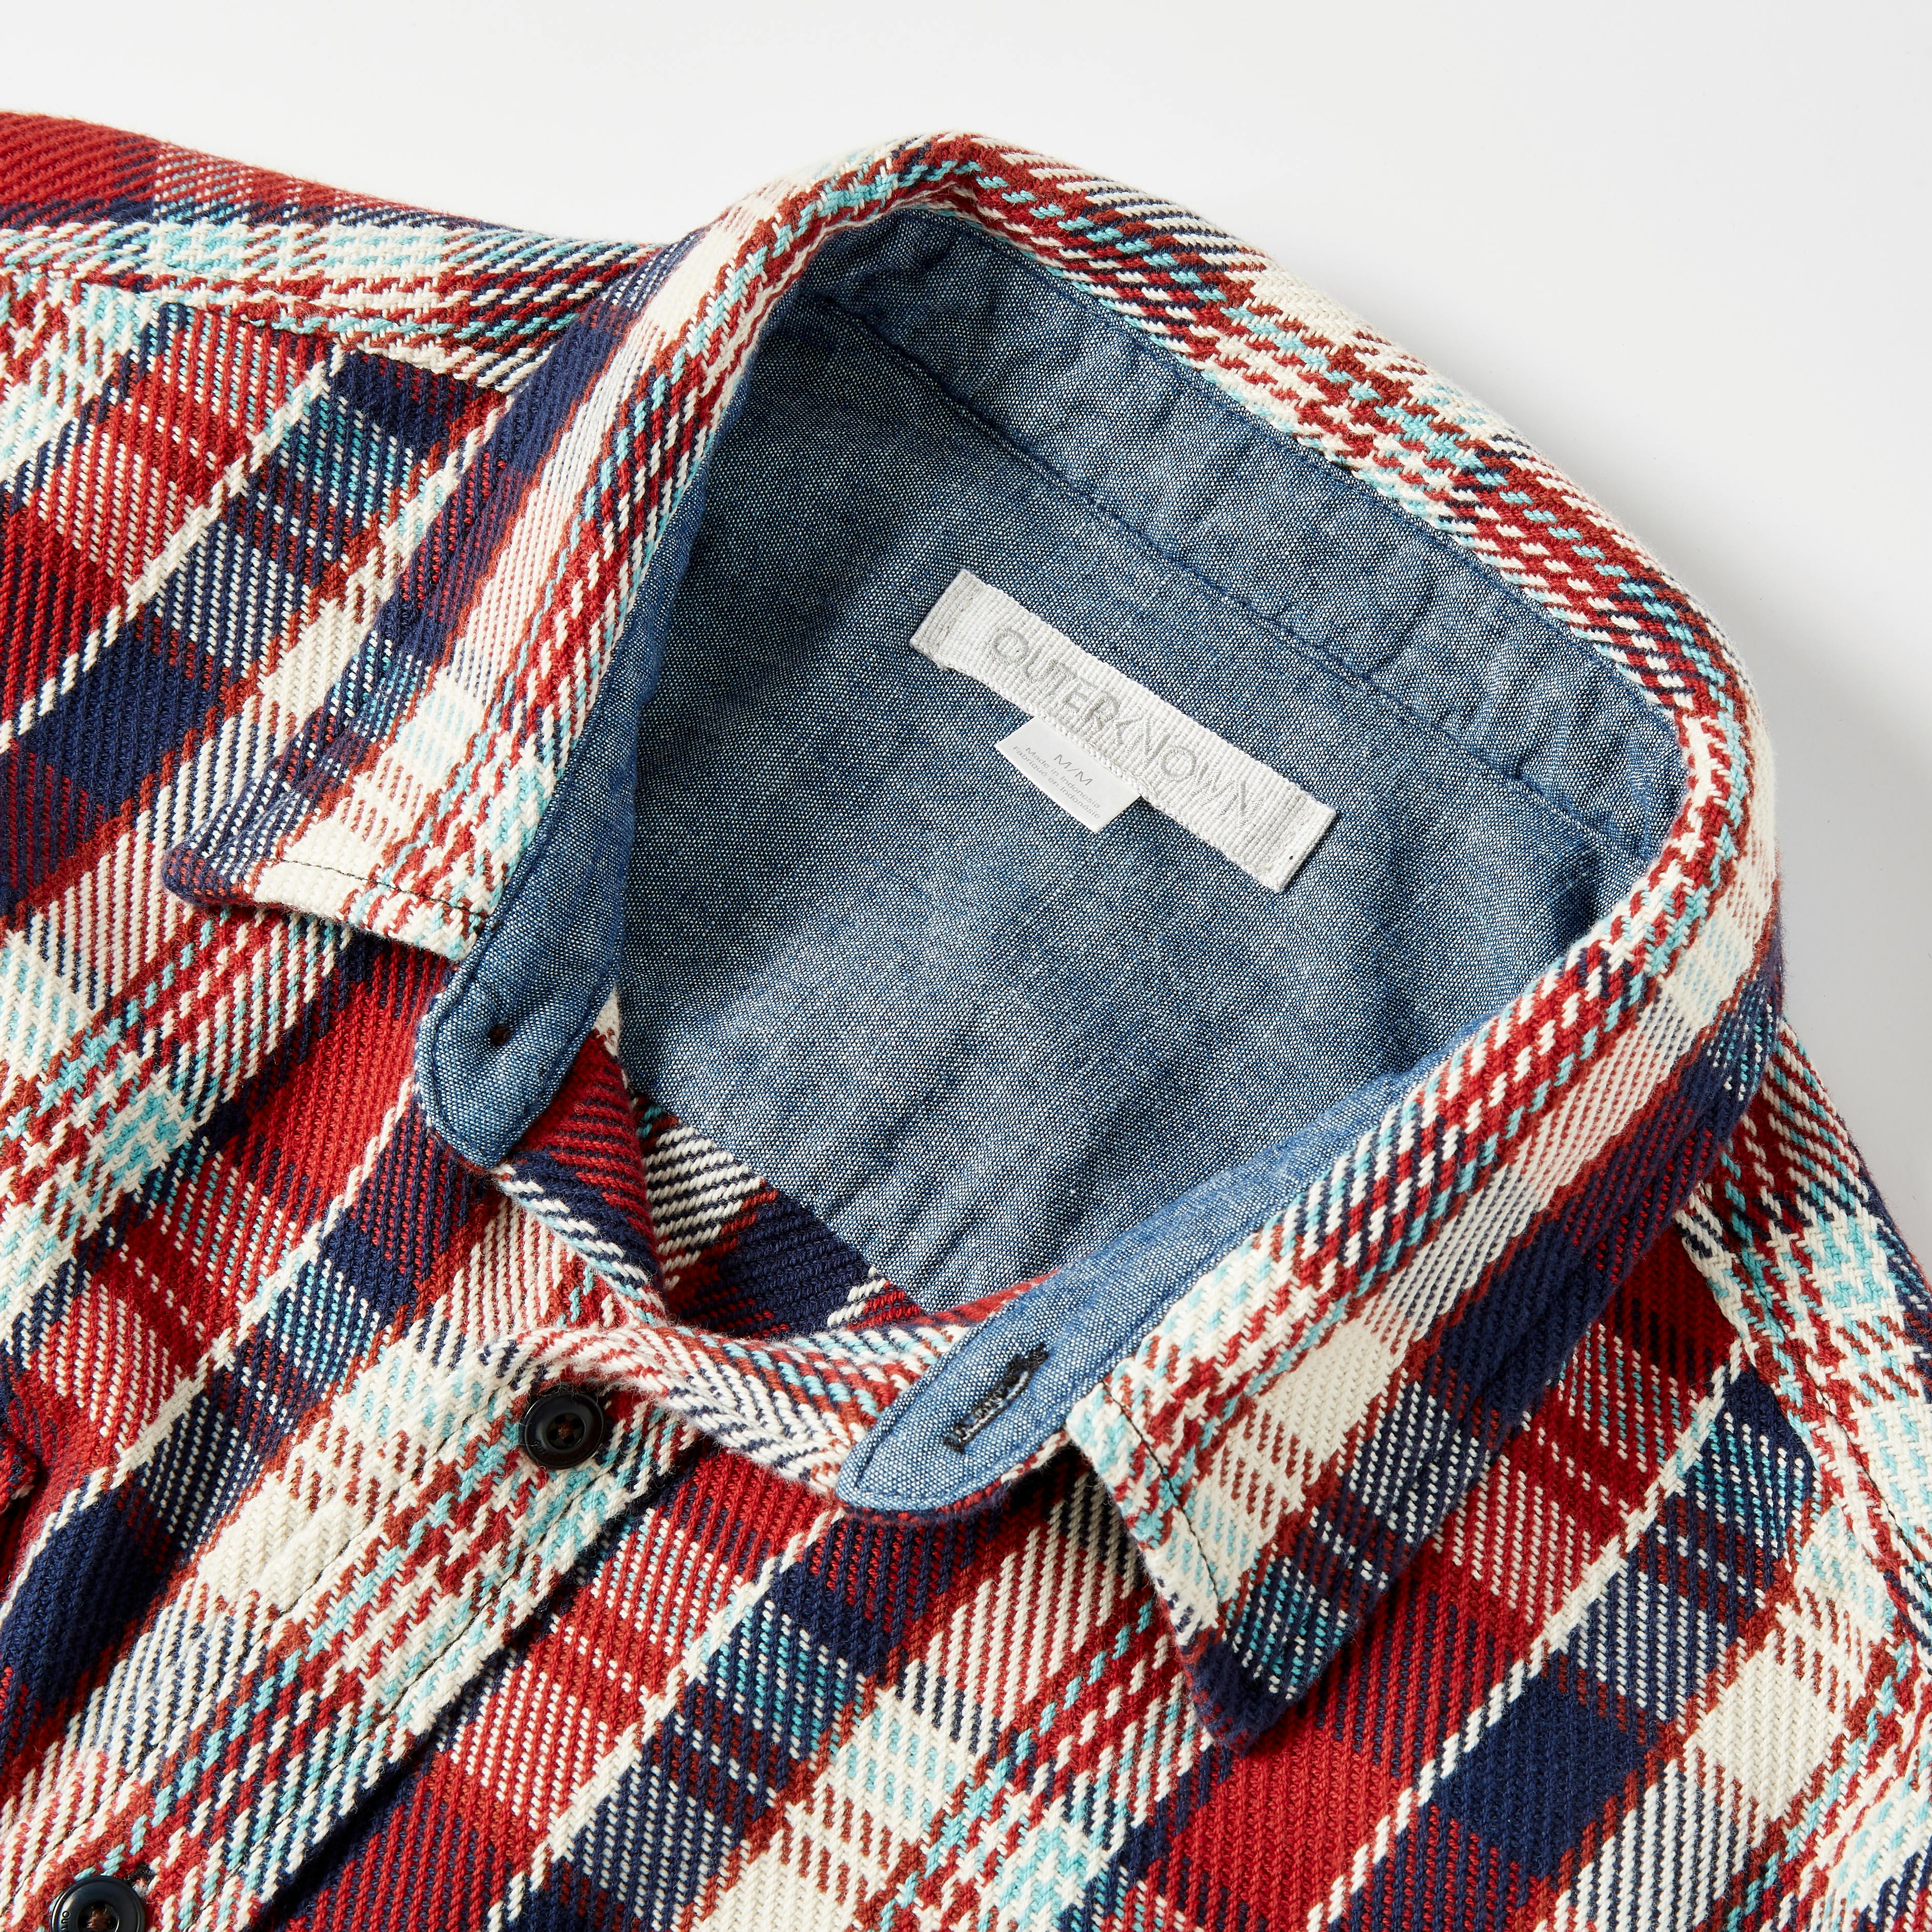 Outerknown Blanket Shirt - Exclusive